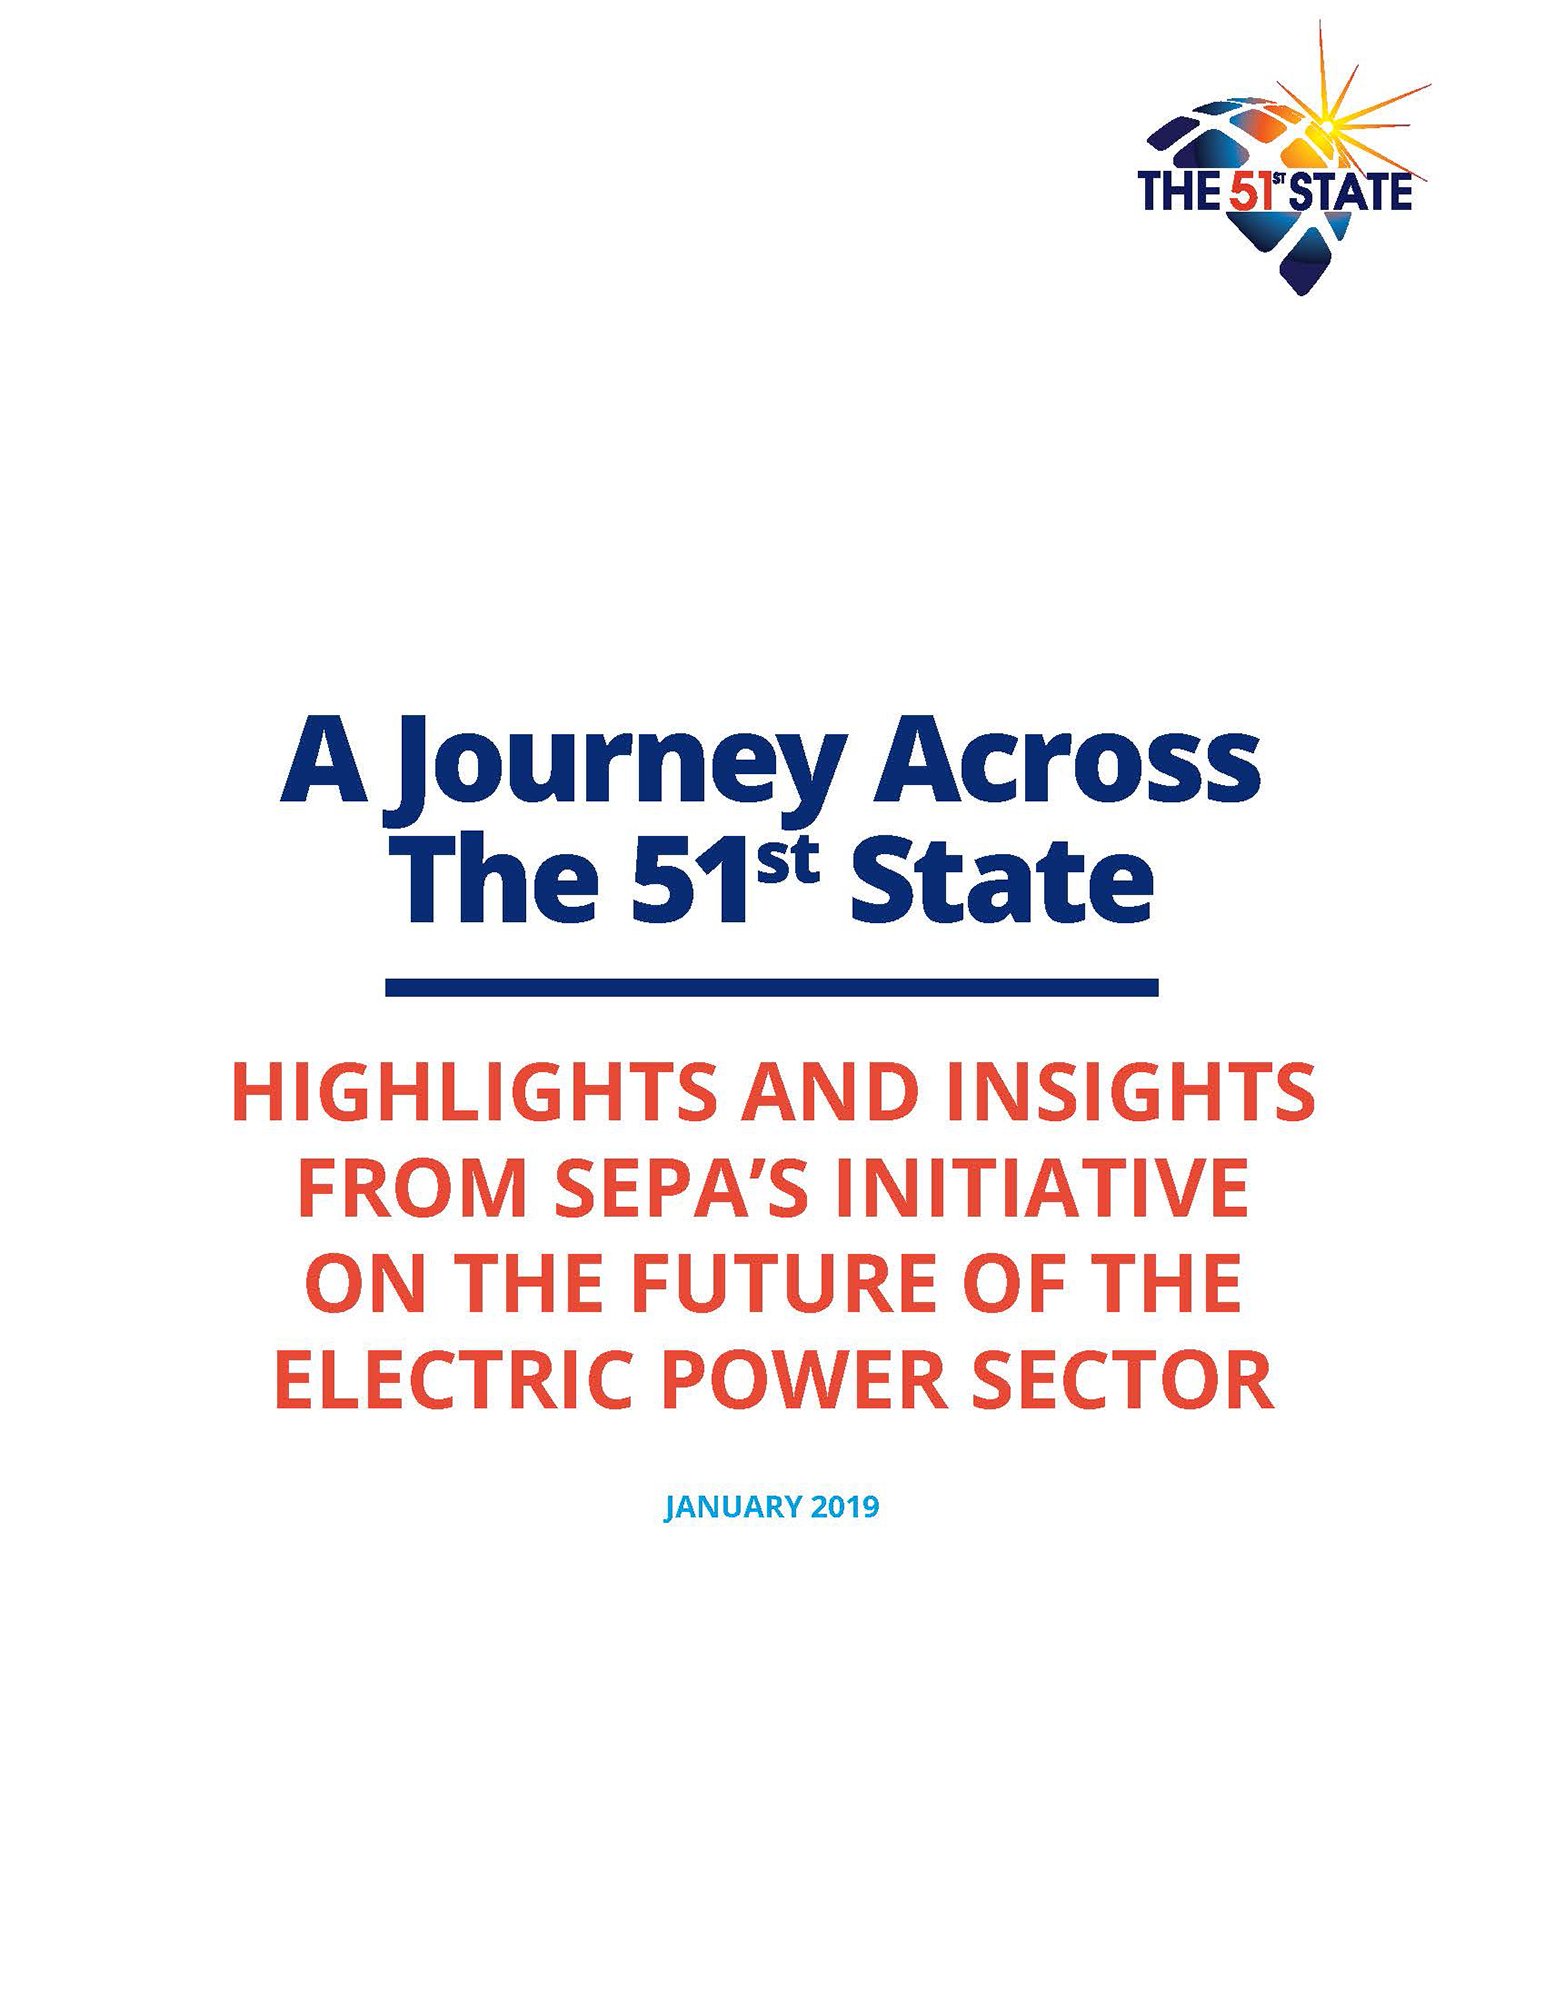 A Journey Across The 51st State: Highlights and Insights from SEPA’s Initiative on the Future of the Electric Power Sector